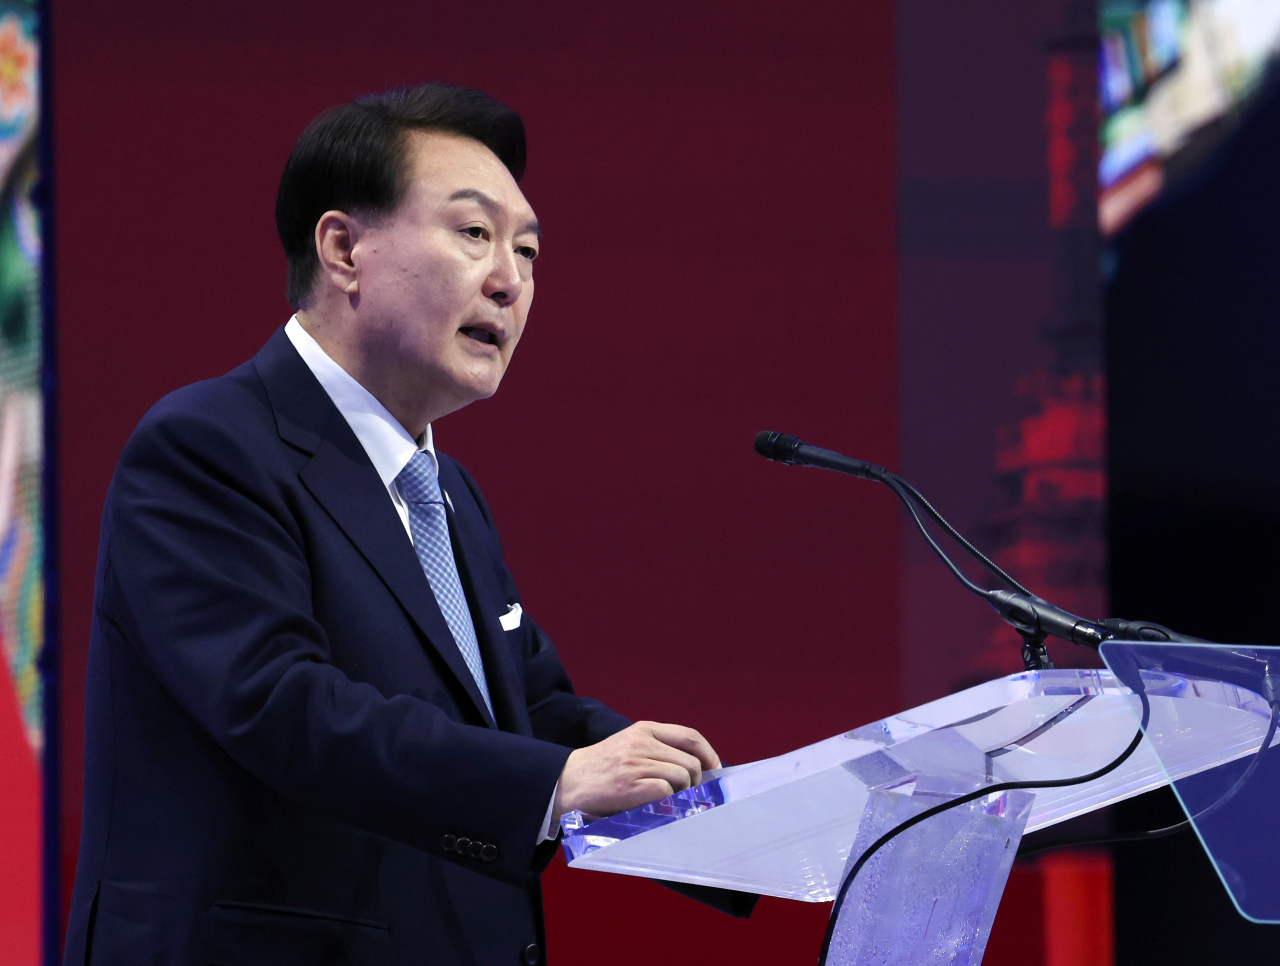 President Yoon Suk Yeol delivers a keynote speech during the APEC CEO Summit in San Francisco on Wednesday. (Yonhap)